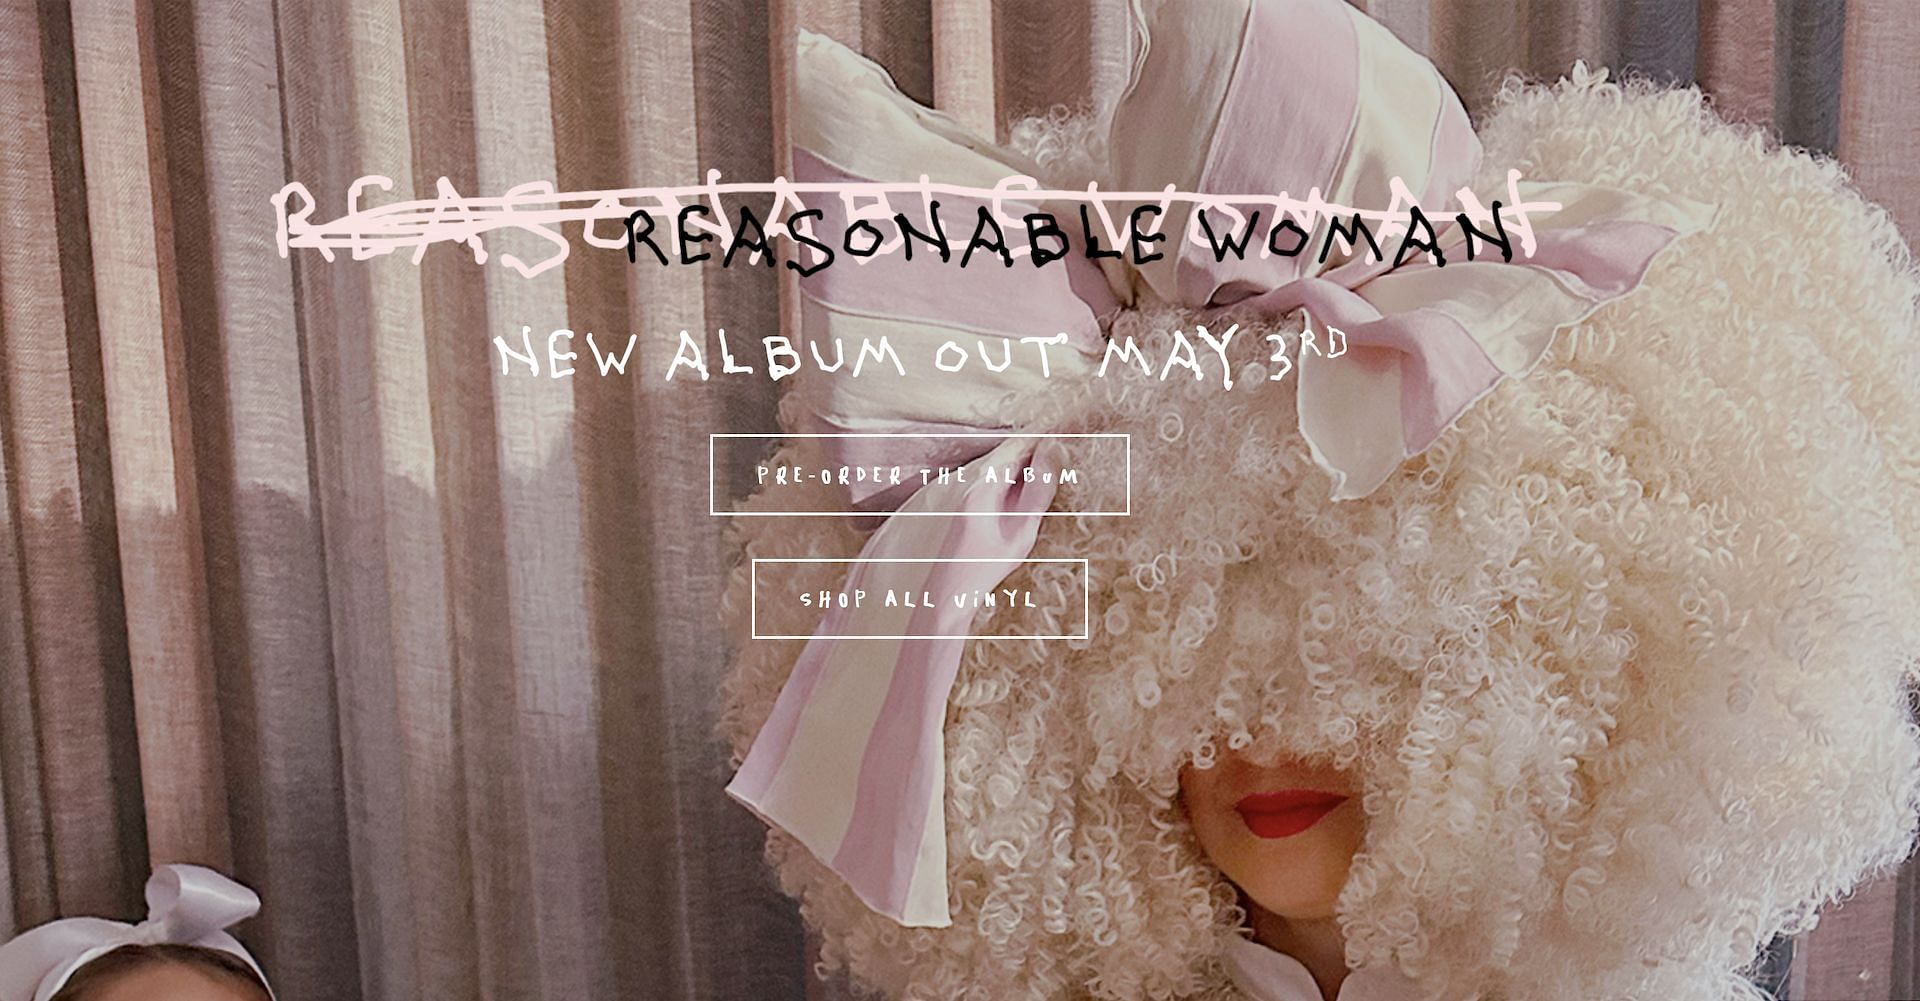 The official website where fans can &quot;Pre-Order&quot; the Digital and Physical copies of &#039;Reasonable Woman&#039; (Image via Sia&#039;s Official Website)